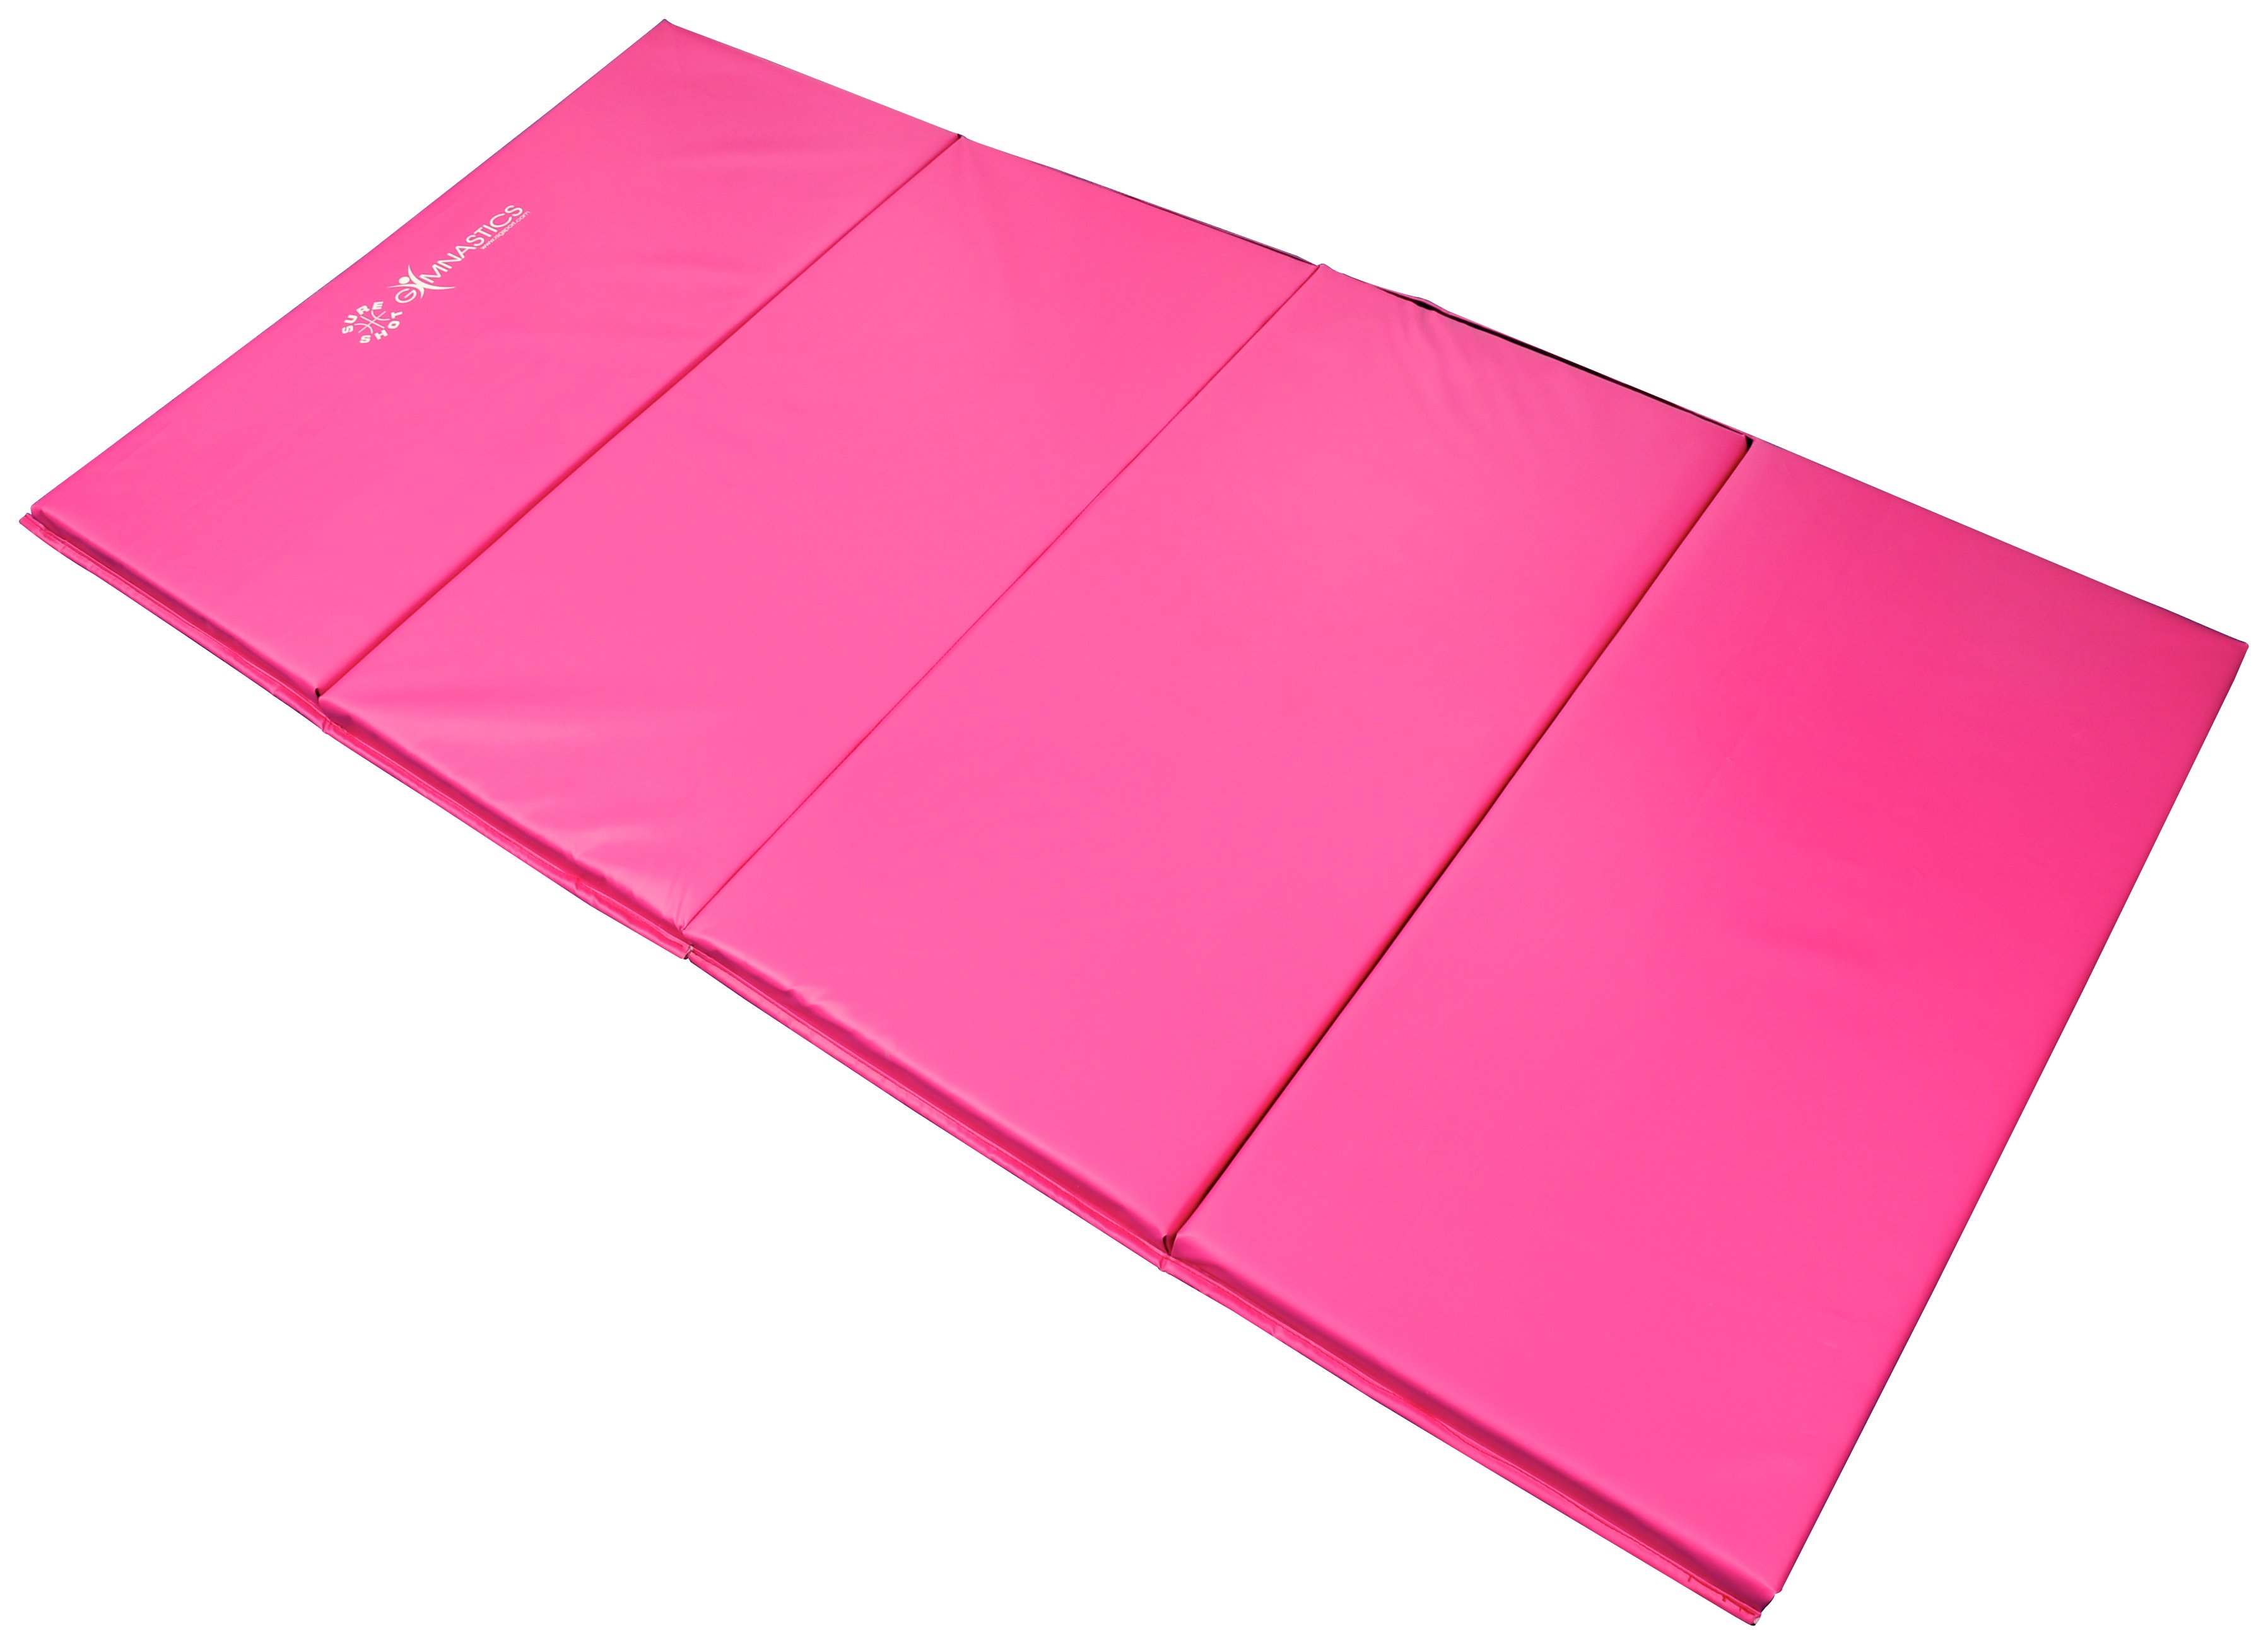 Buy Opti 12mm Thickness Yoga Exercise Mat, Exercise and yoga mats